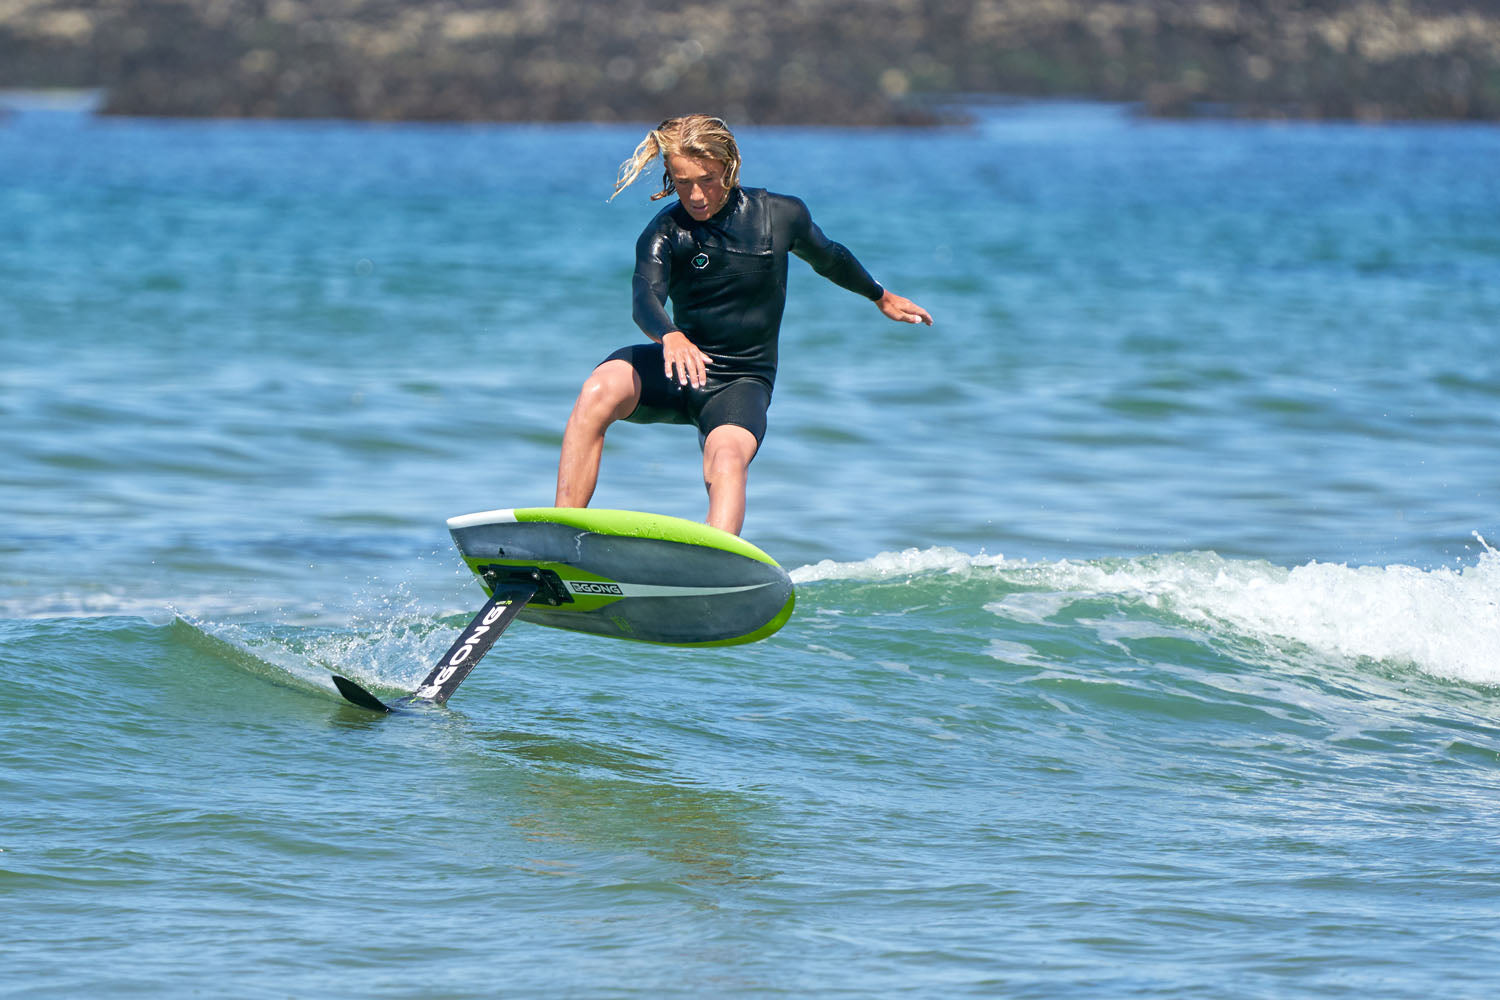 SHOP: 10% DISCOUNT ON OUR SURF FOILING BOARDS!